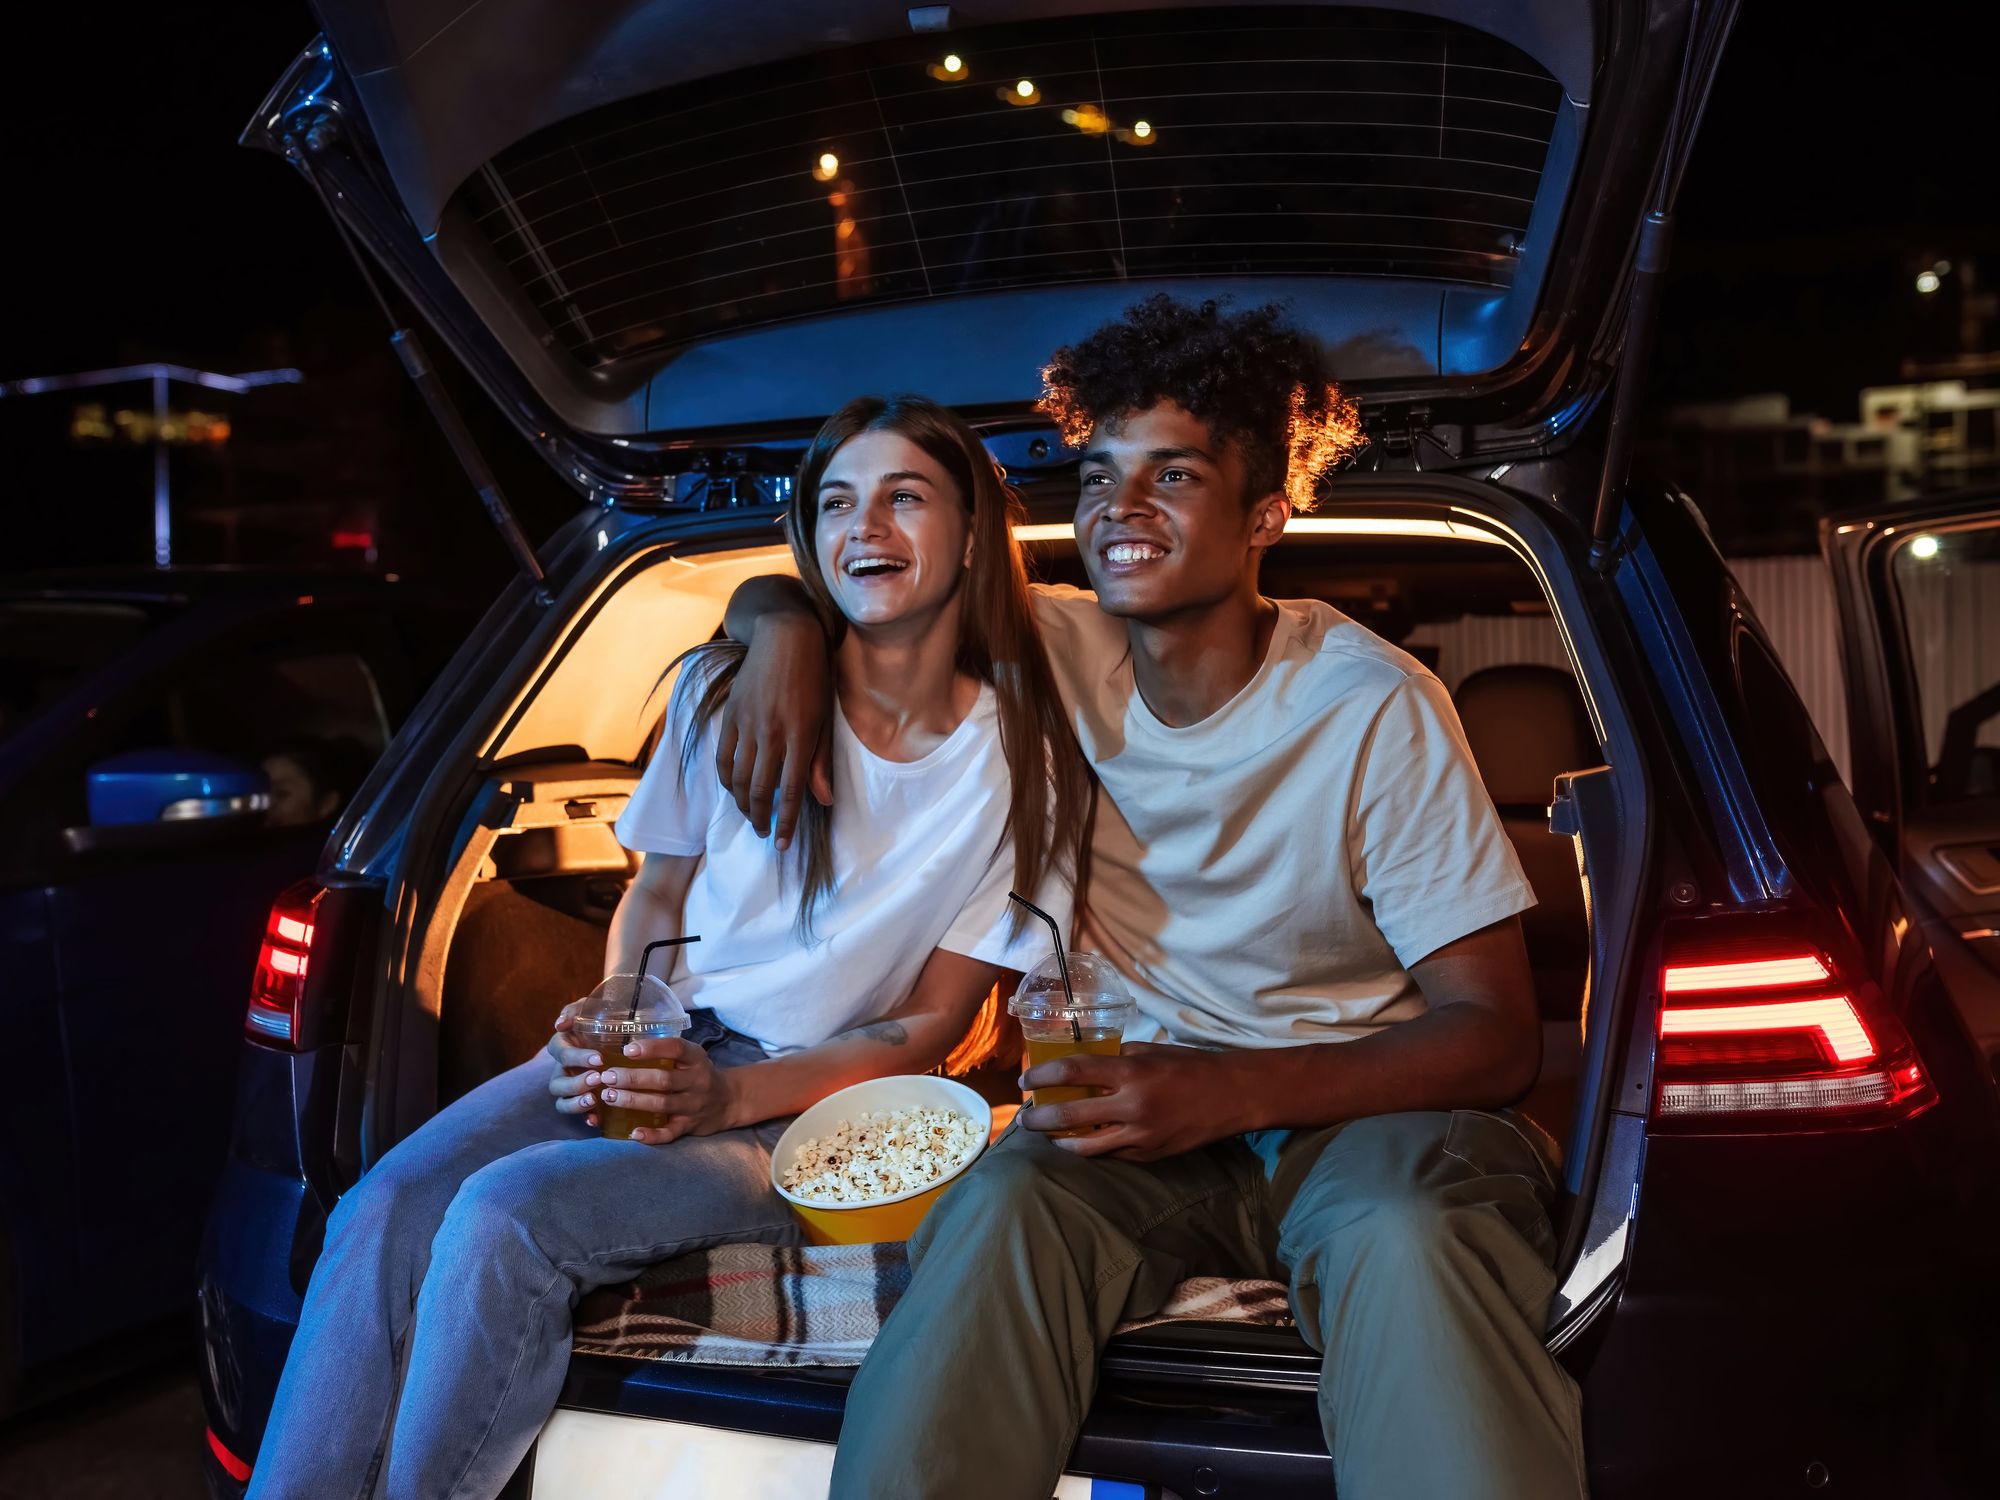 Couple at drive-in movie